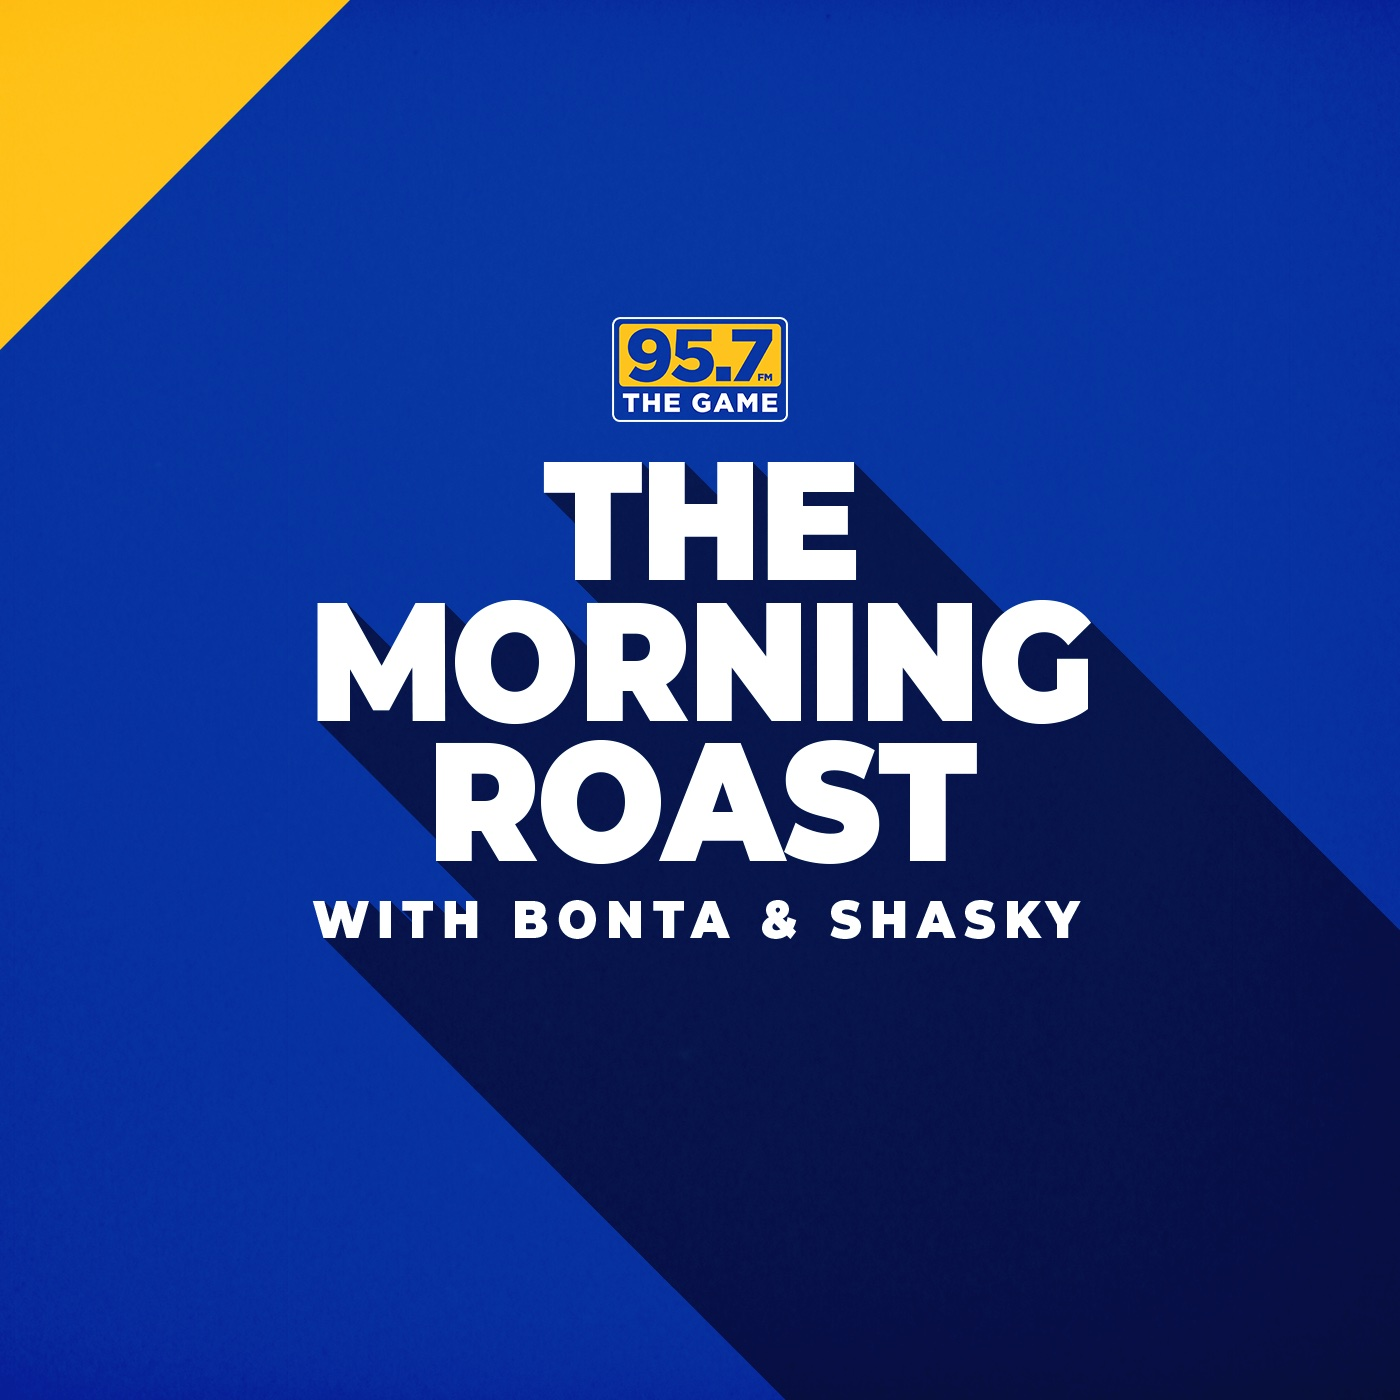 Anthony Slater joins The Morning Roast to discuss Andrew Wiggins Return